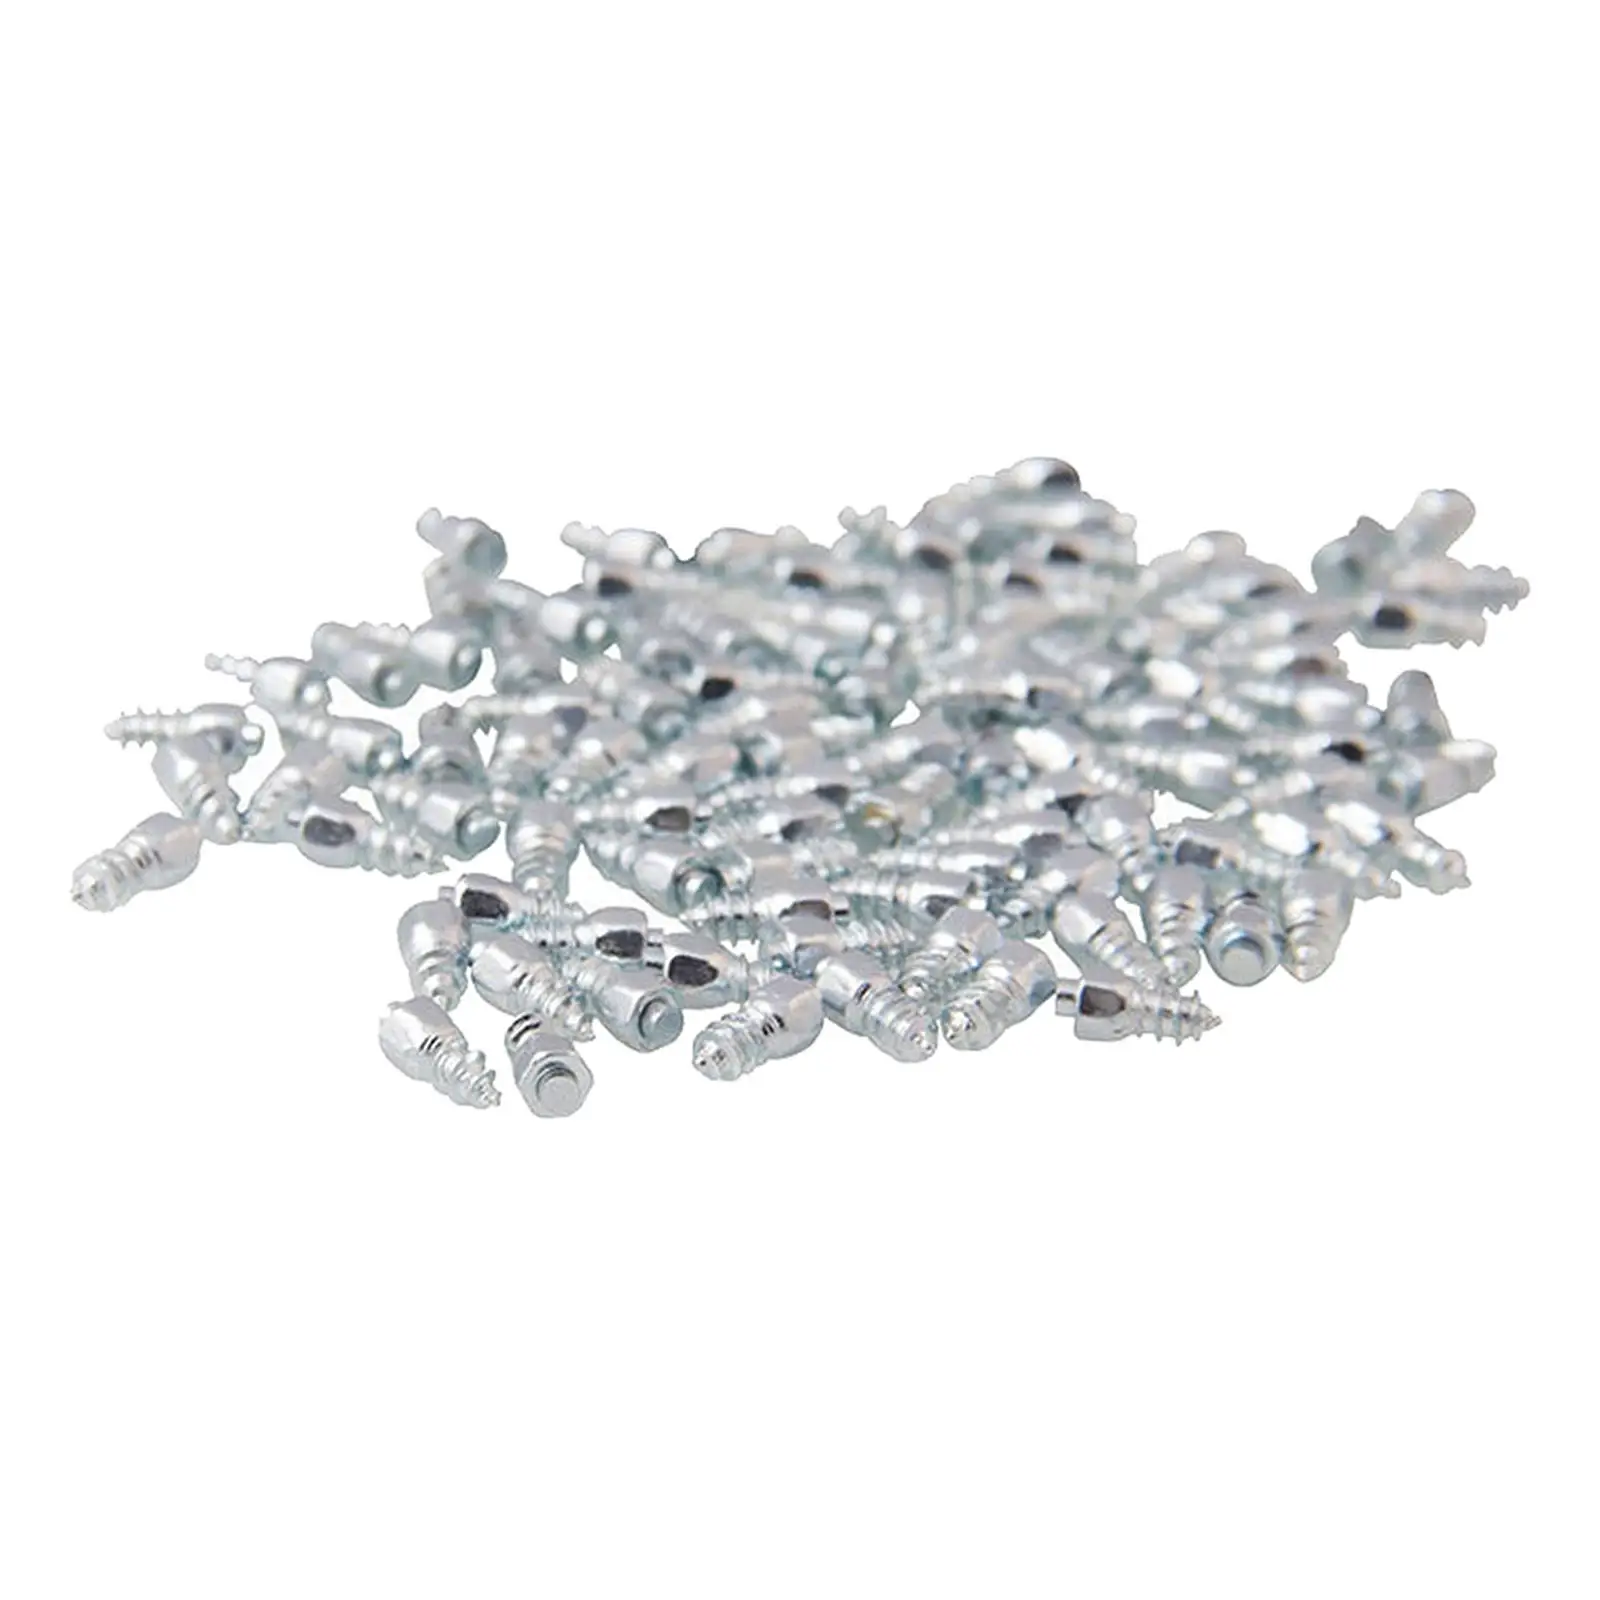 100pcs 9 mm Tire Snow Chains Spikes Studs For ATV Car Motorcycle Tire Tyre Snow Chains Studs